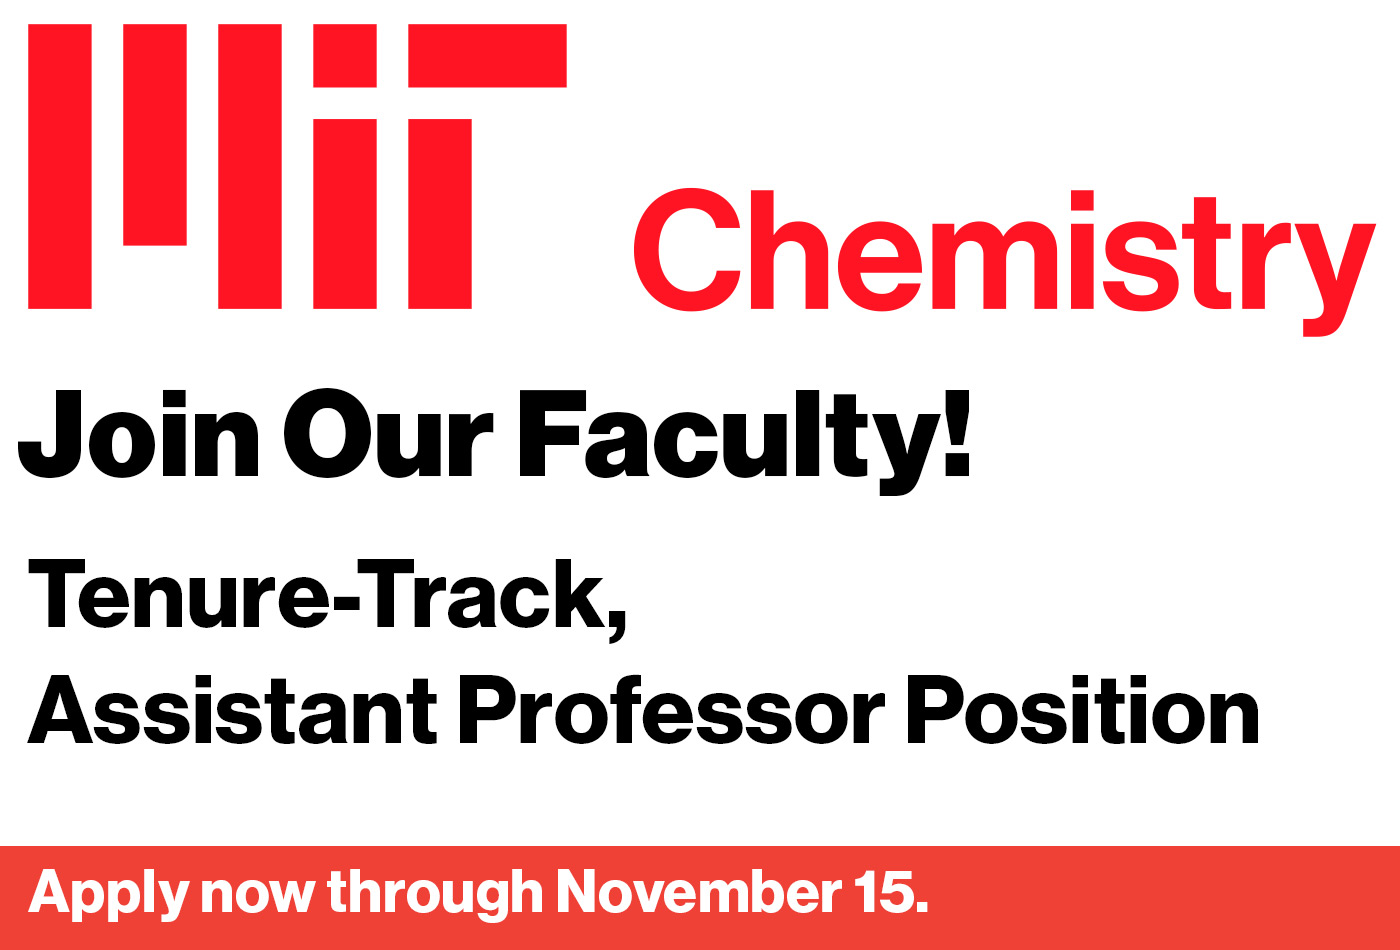 Join Our Faculty! Tenure-Track, Assistant Professor Positions. Apply now through November 15.